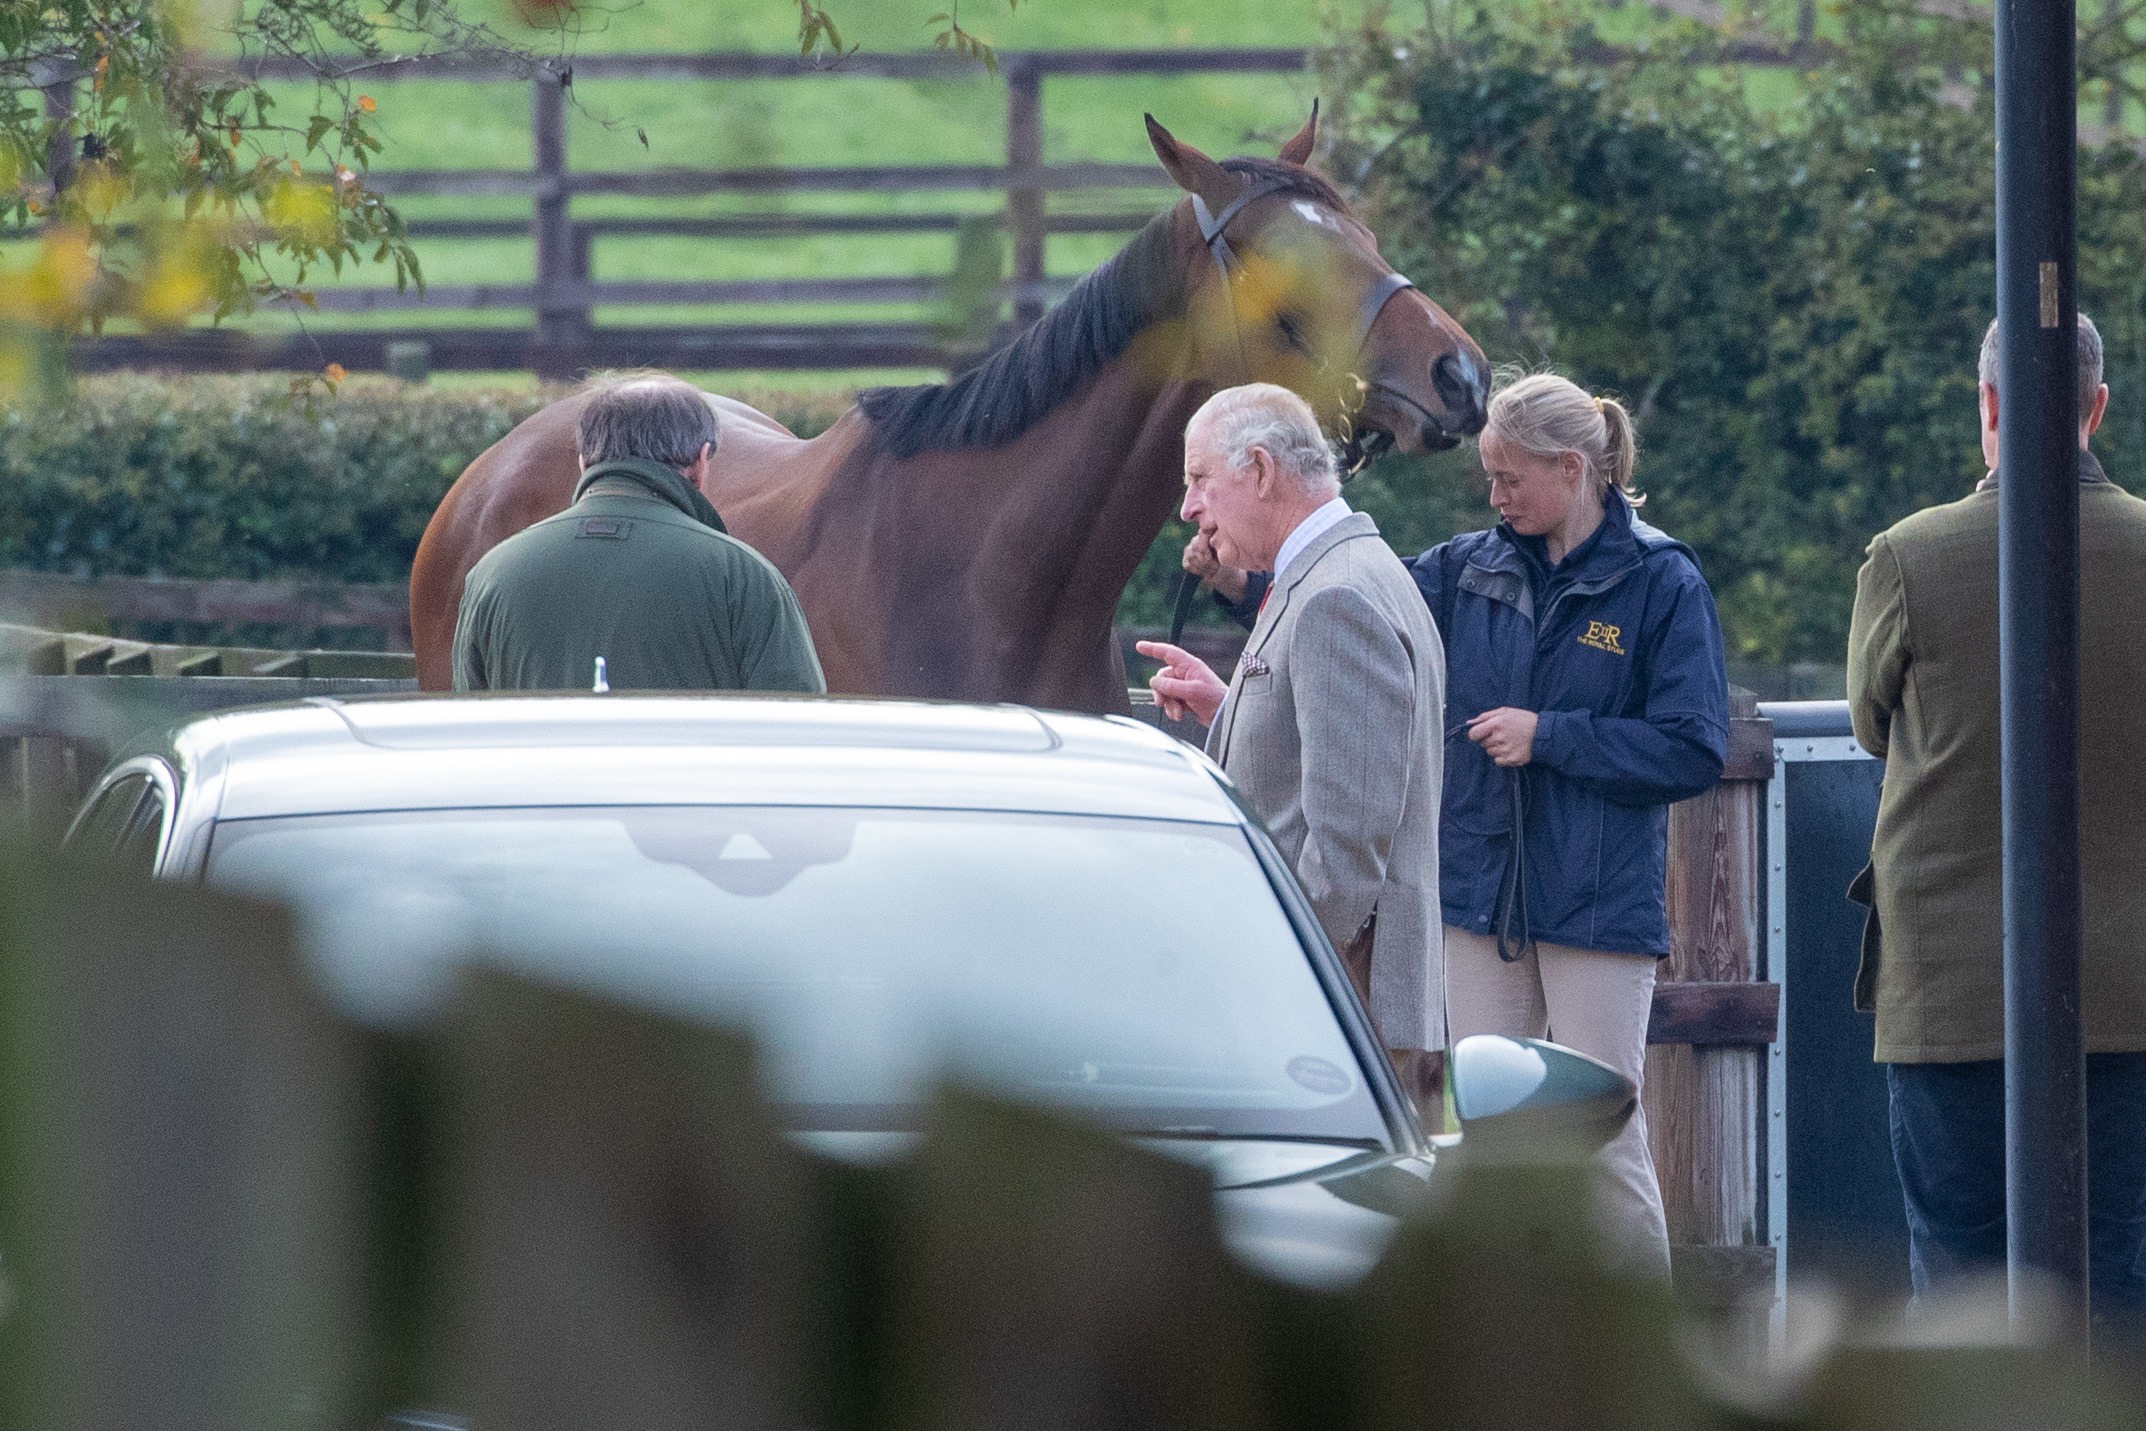 , King Charles pictured inspecting Queen’s racehorses before making £1m by selling 14 of them in Royal racing shake-up